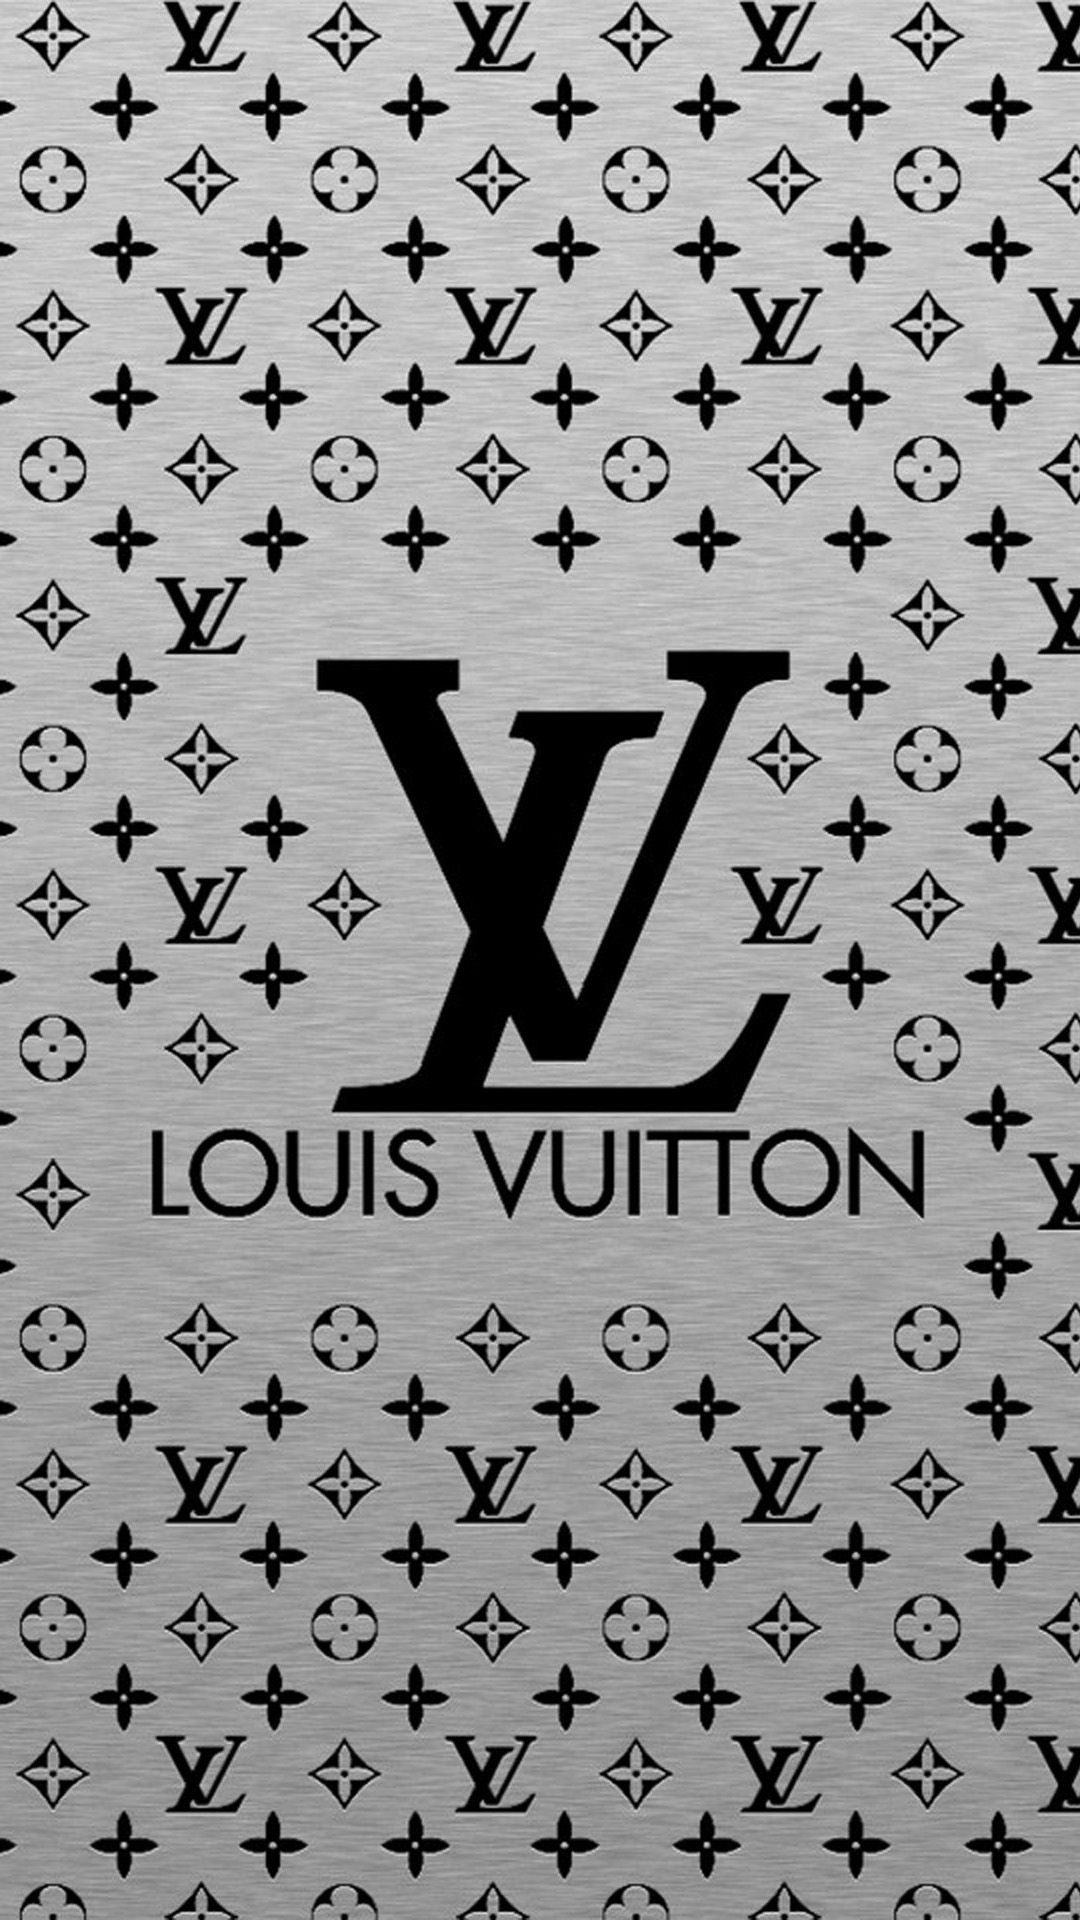 New 2022 Louis Vuitton Wallpaper - Free Download by